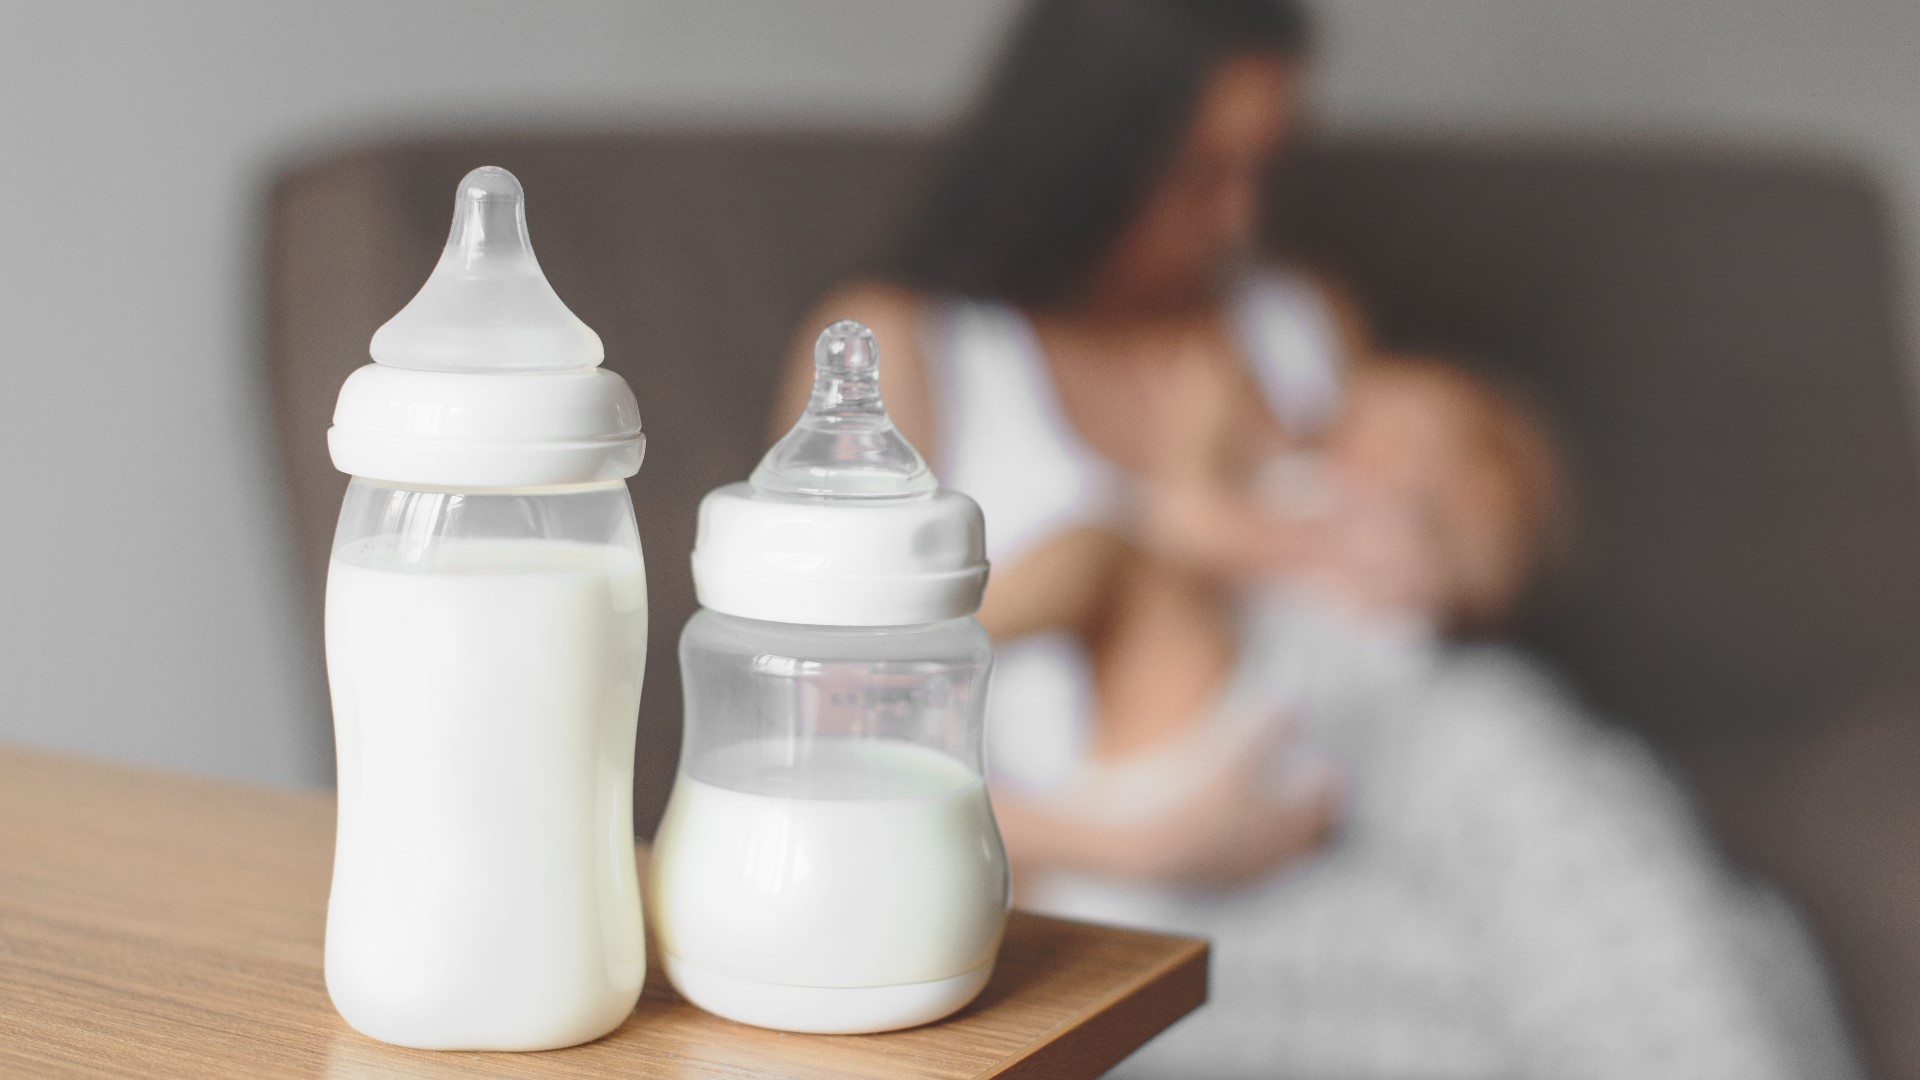 Breastfeeding specialists say, while not everybody can breastfeed, there are more options than most people know about.